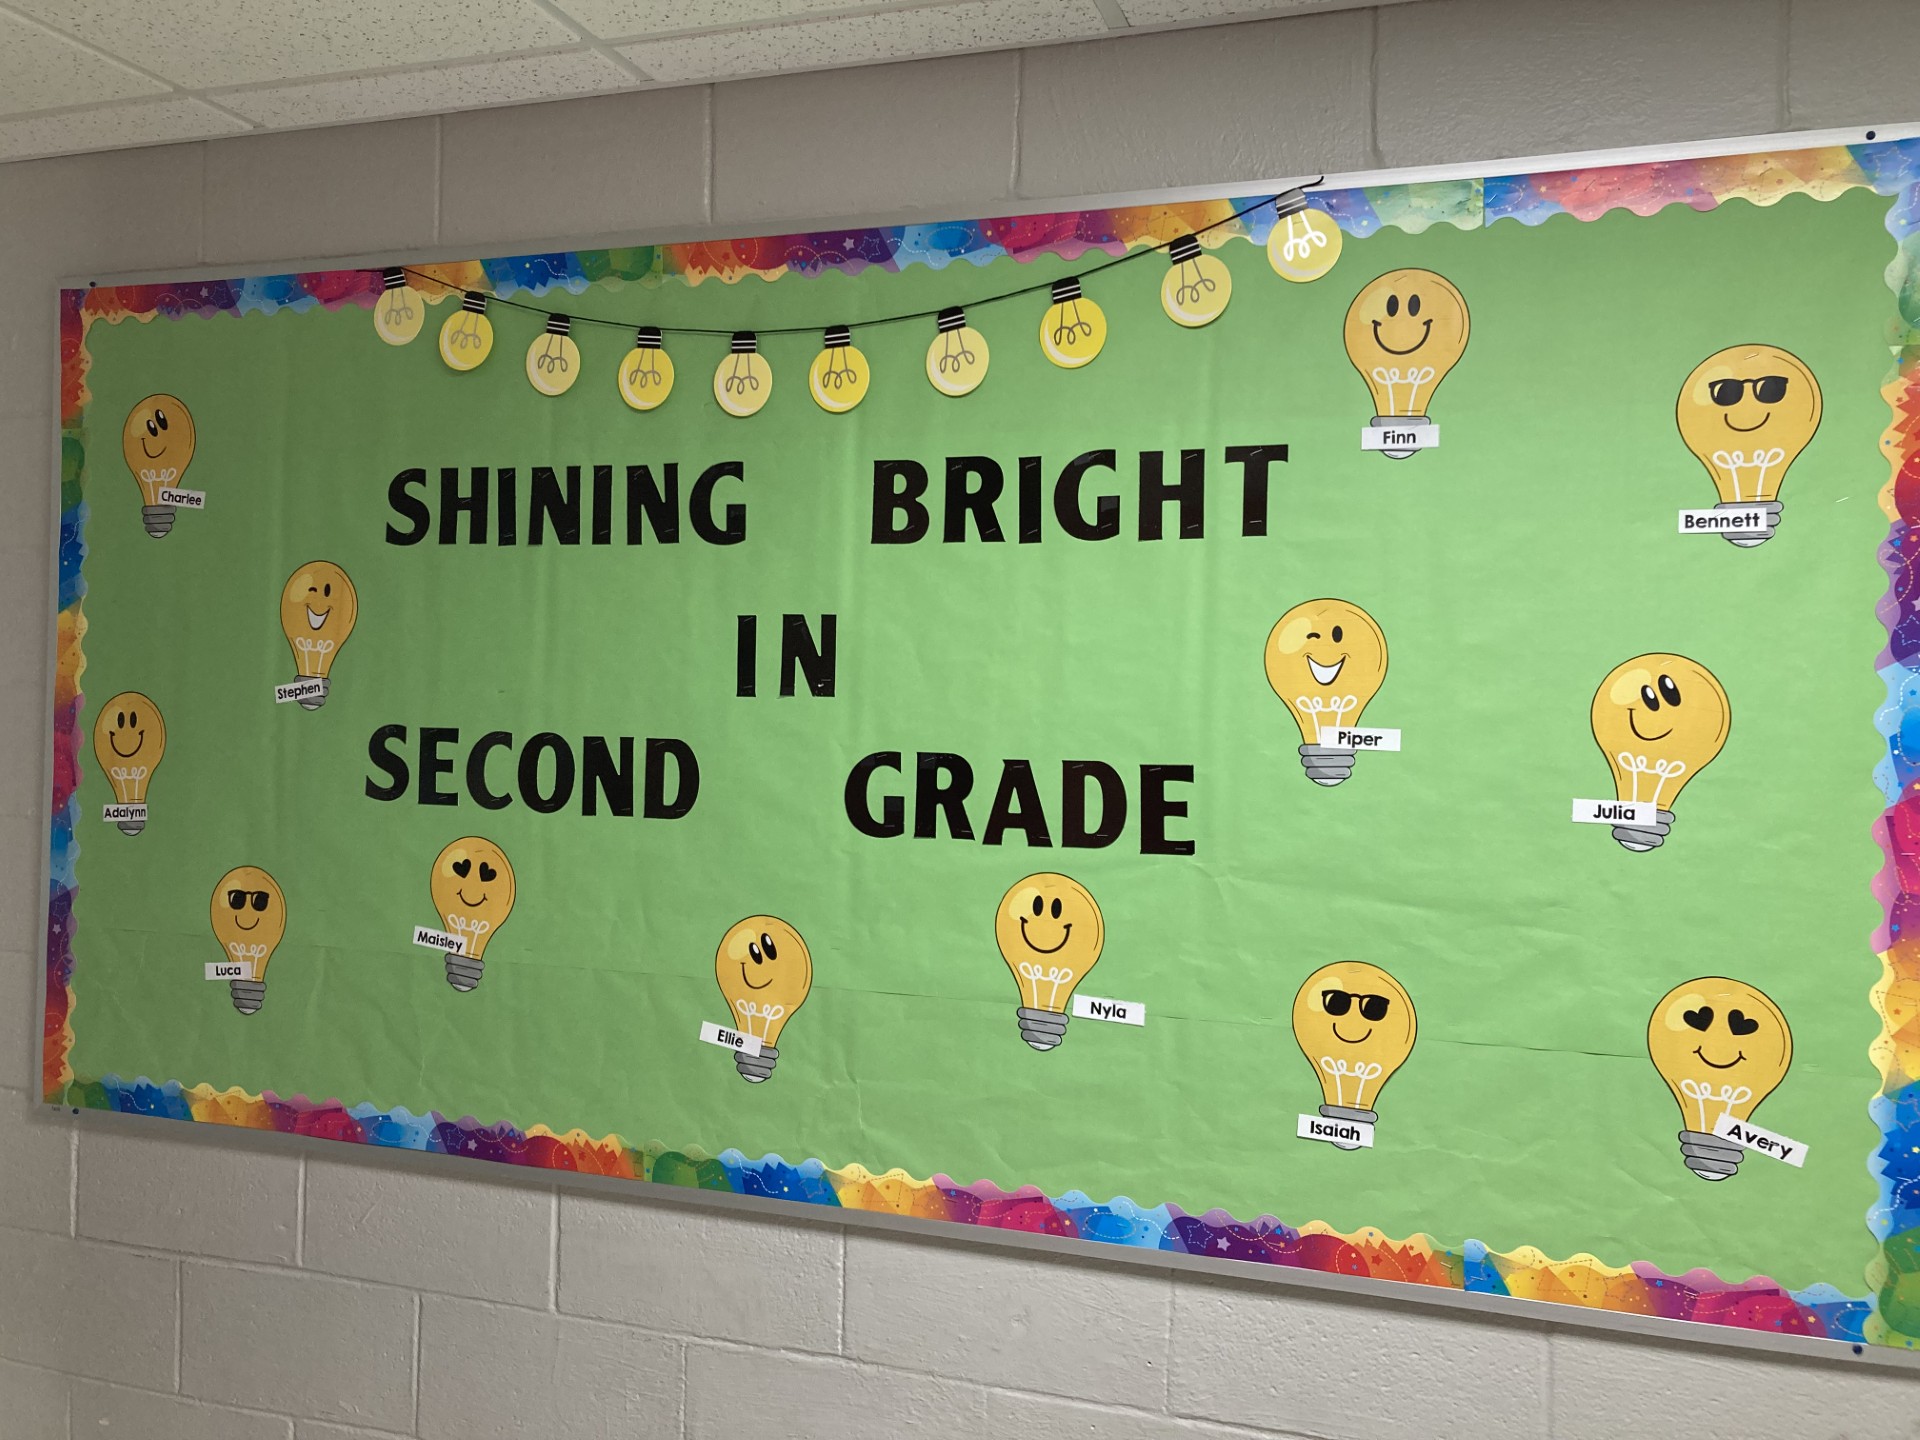 Little light bulbs with student names on them are featured. Bulletin board says Shining Bright in Second Grade.